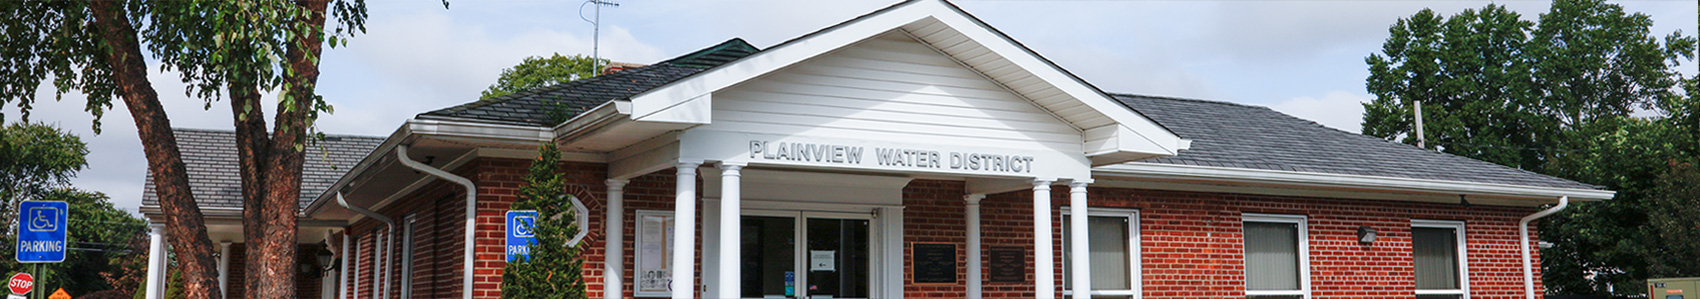 image-about-plainview-water-district